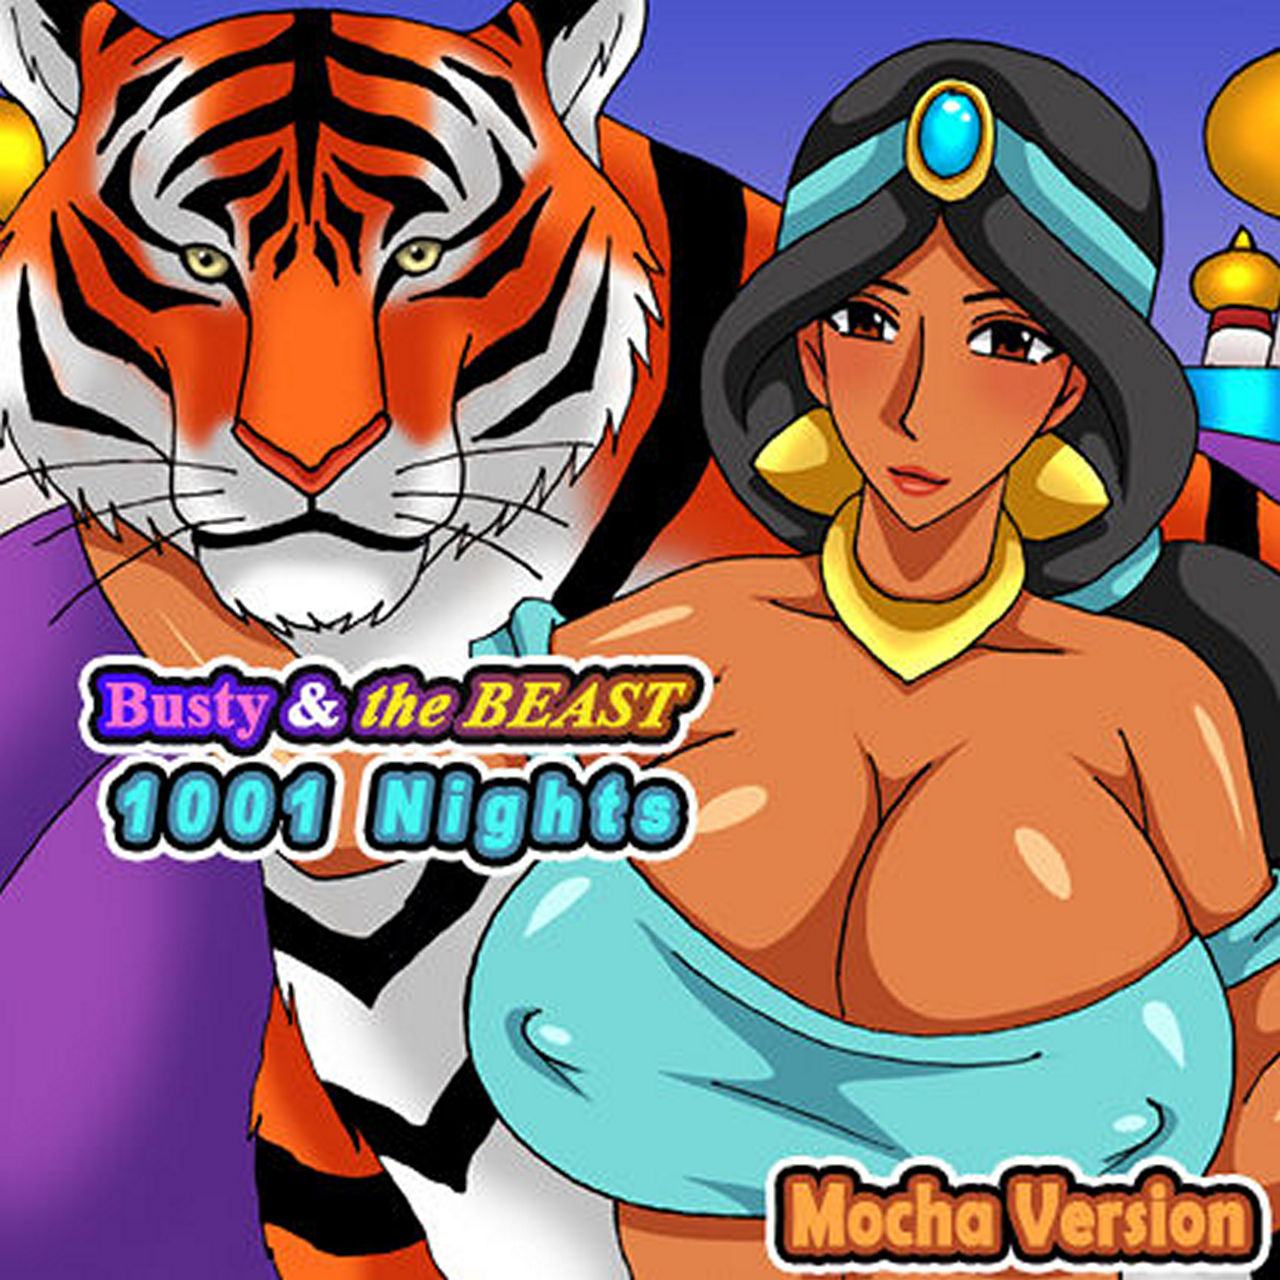 Beast Sex Cartoon - Busty And The Beast - 1001 Nights - MyHentaiGallery Free Porn Comics and Sex  Cartoons